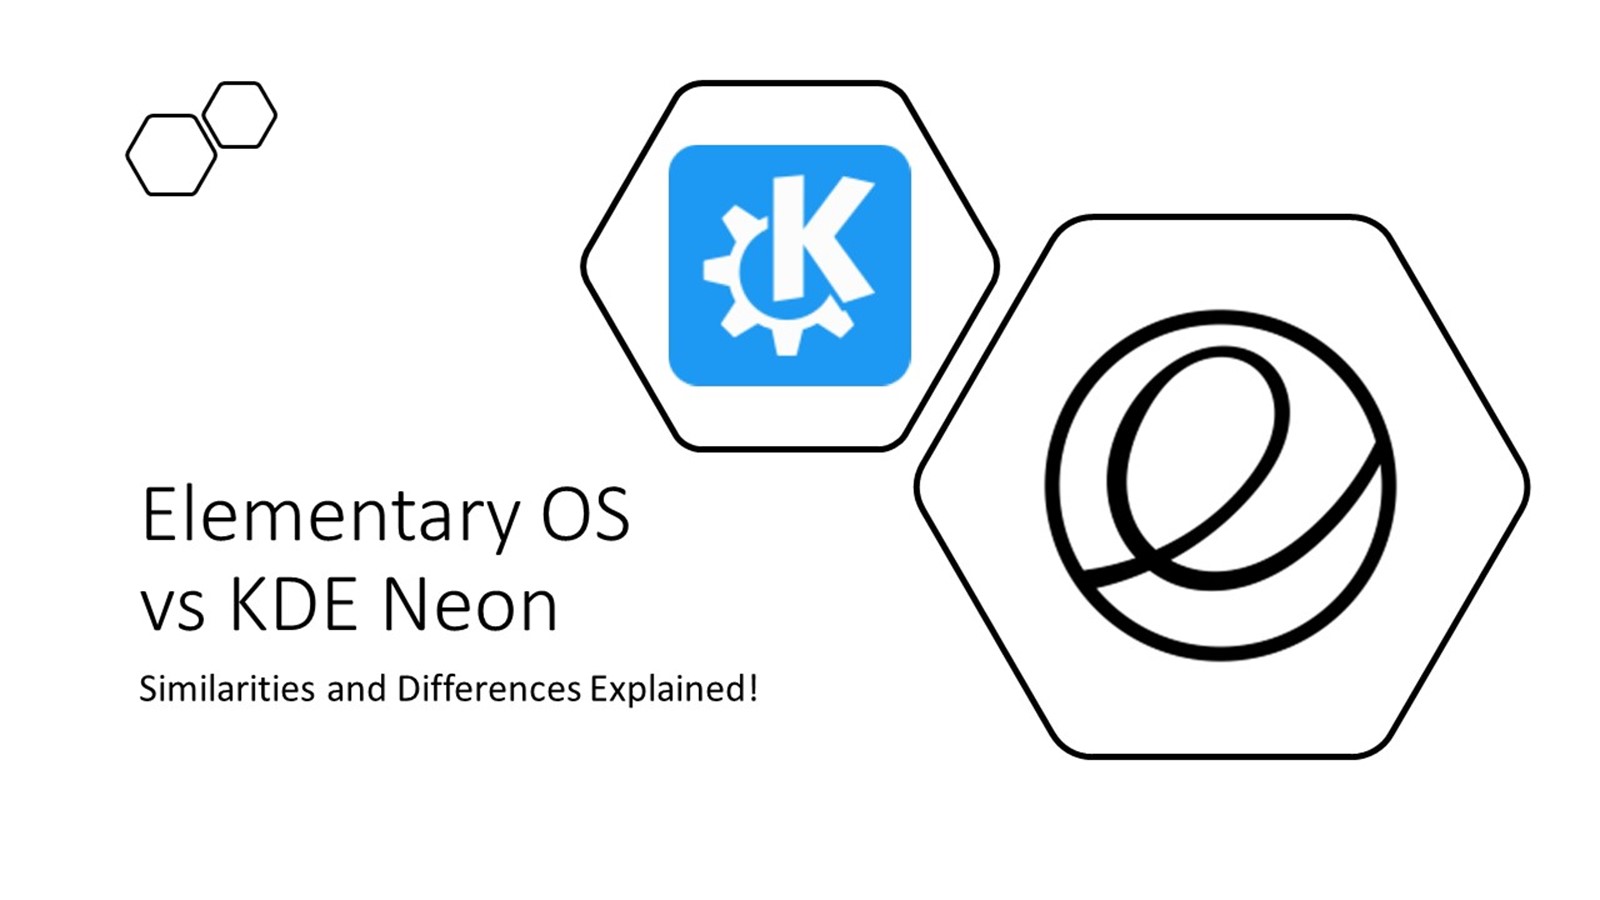 Elementary OS vs KDE Neon: Similarities & Differences!